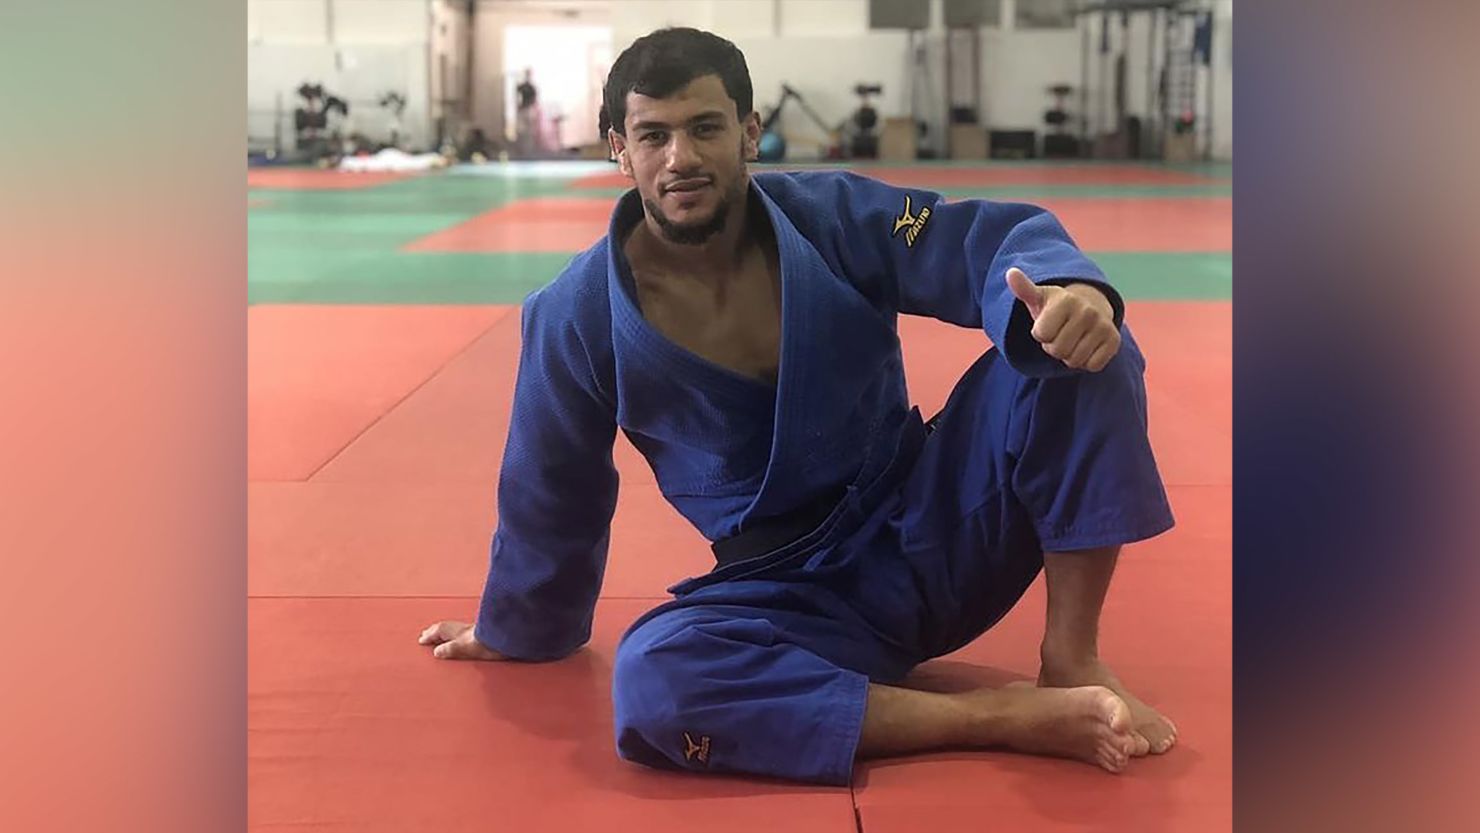 Algerian judoka Fethi Nourine was suspended and sent home after announcing his withdrawal from the Tokyo Olympics to avoid facing an Israeli competitor.